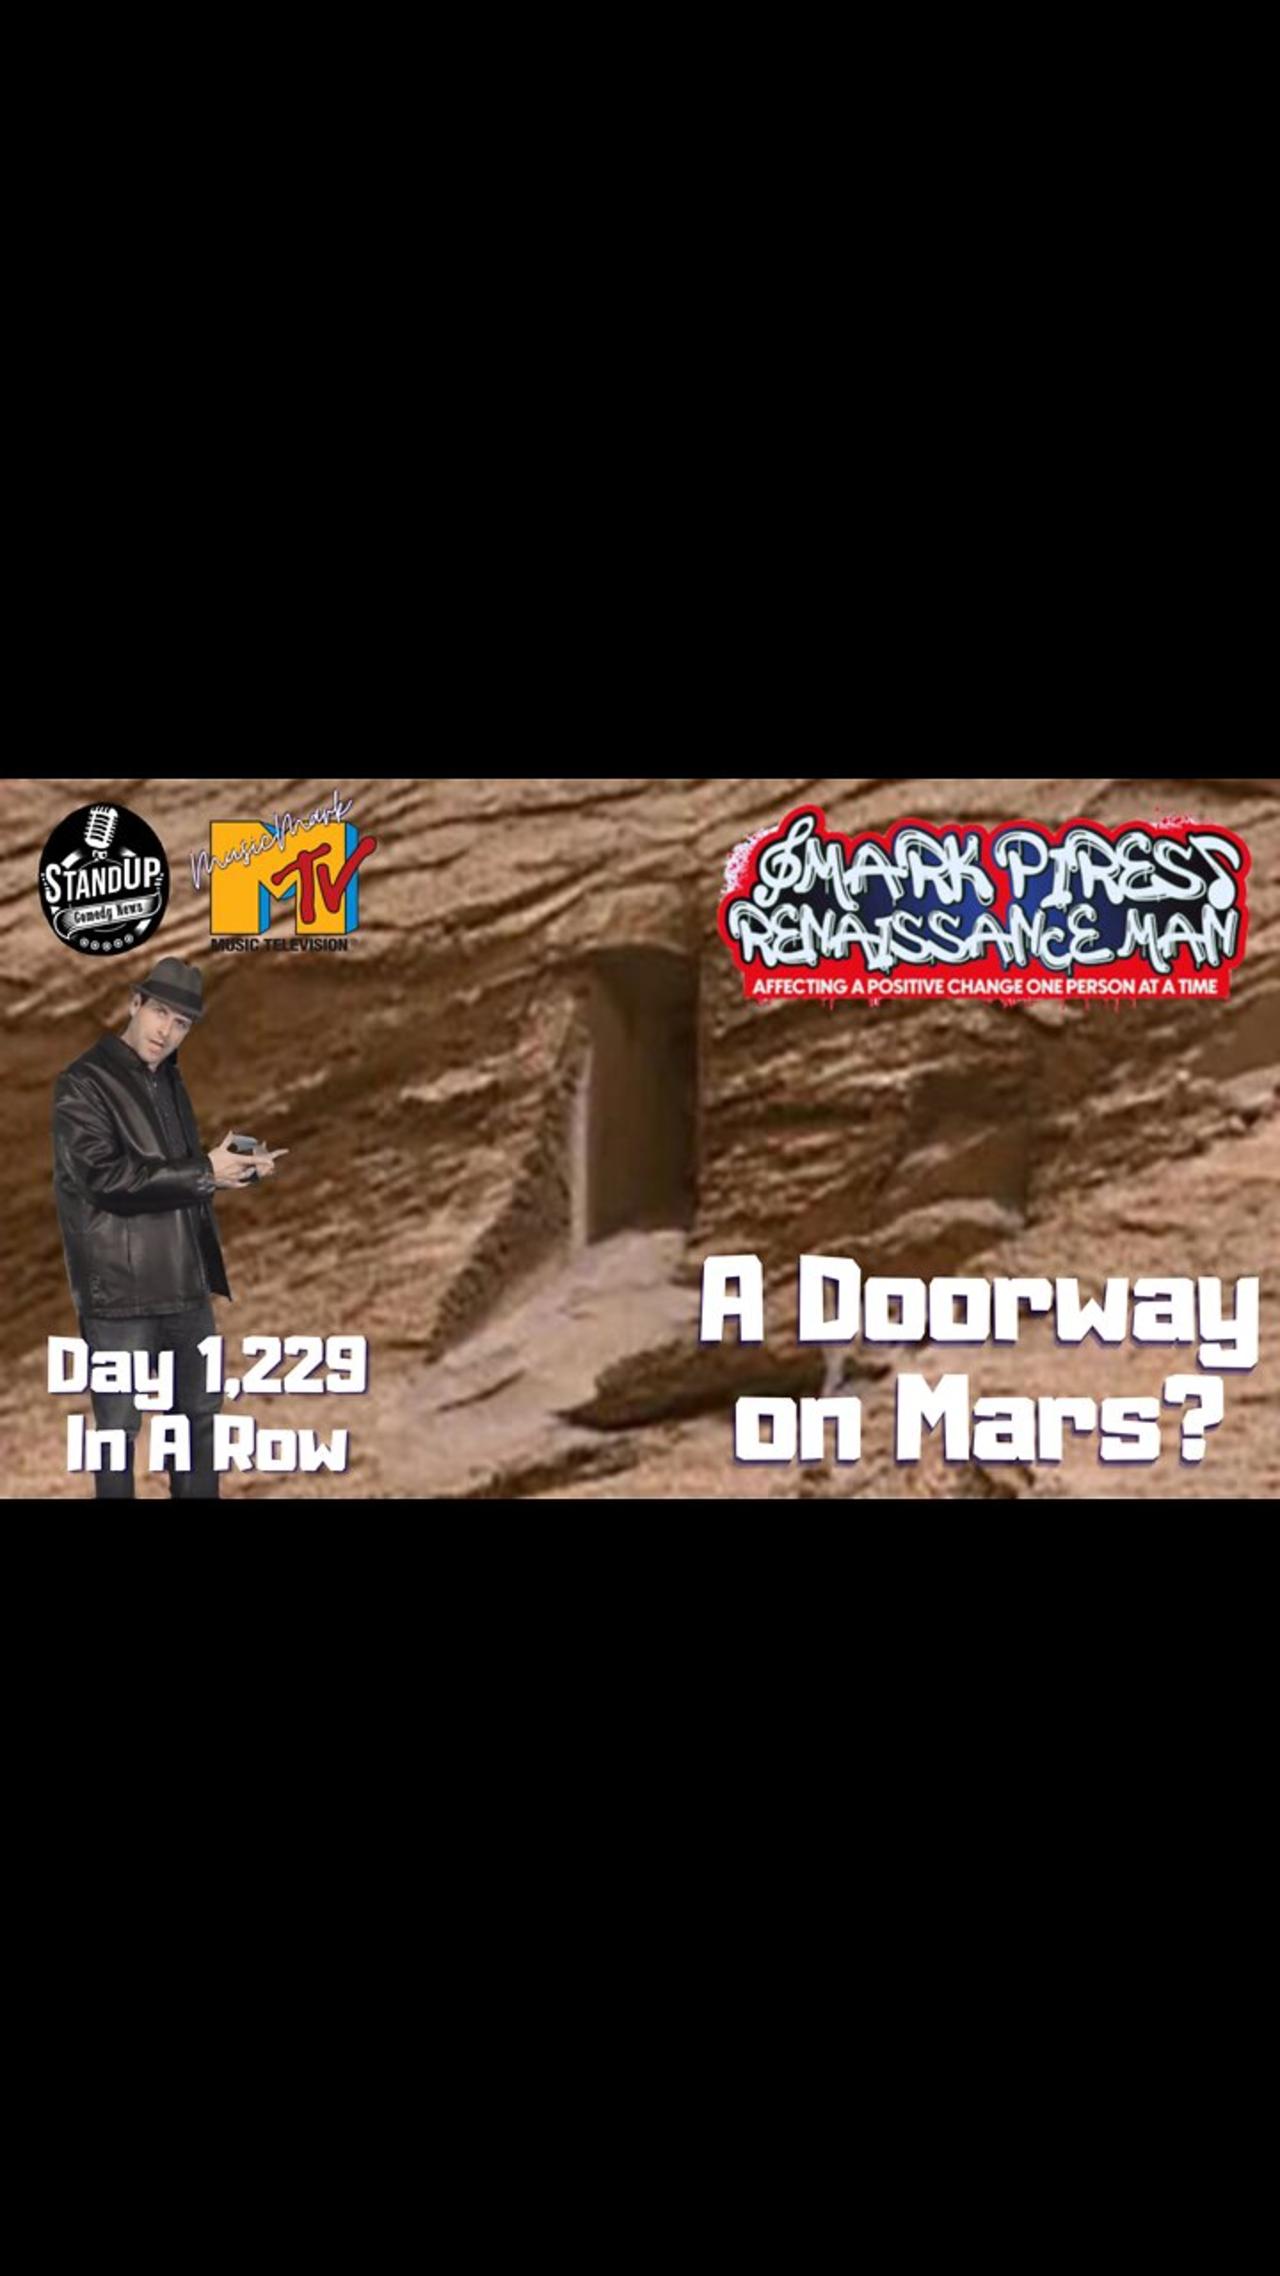 Is There A Doorway on Mars? Comedy News, Live Jams & Positive Vibes!